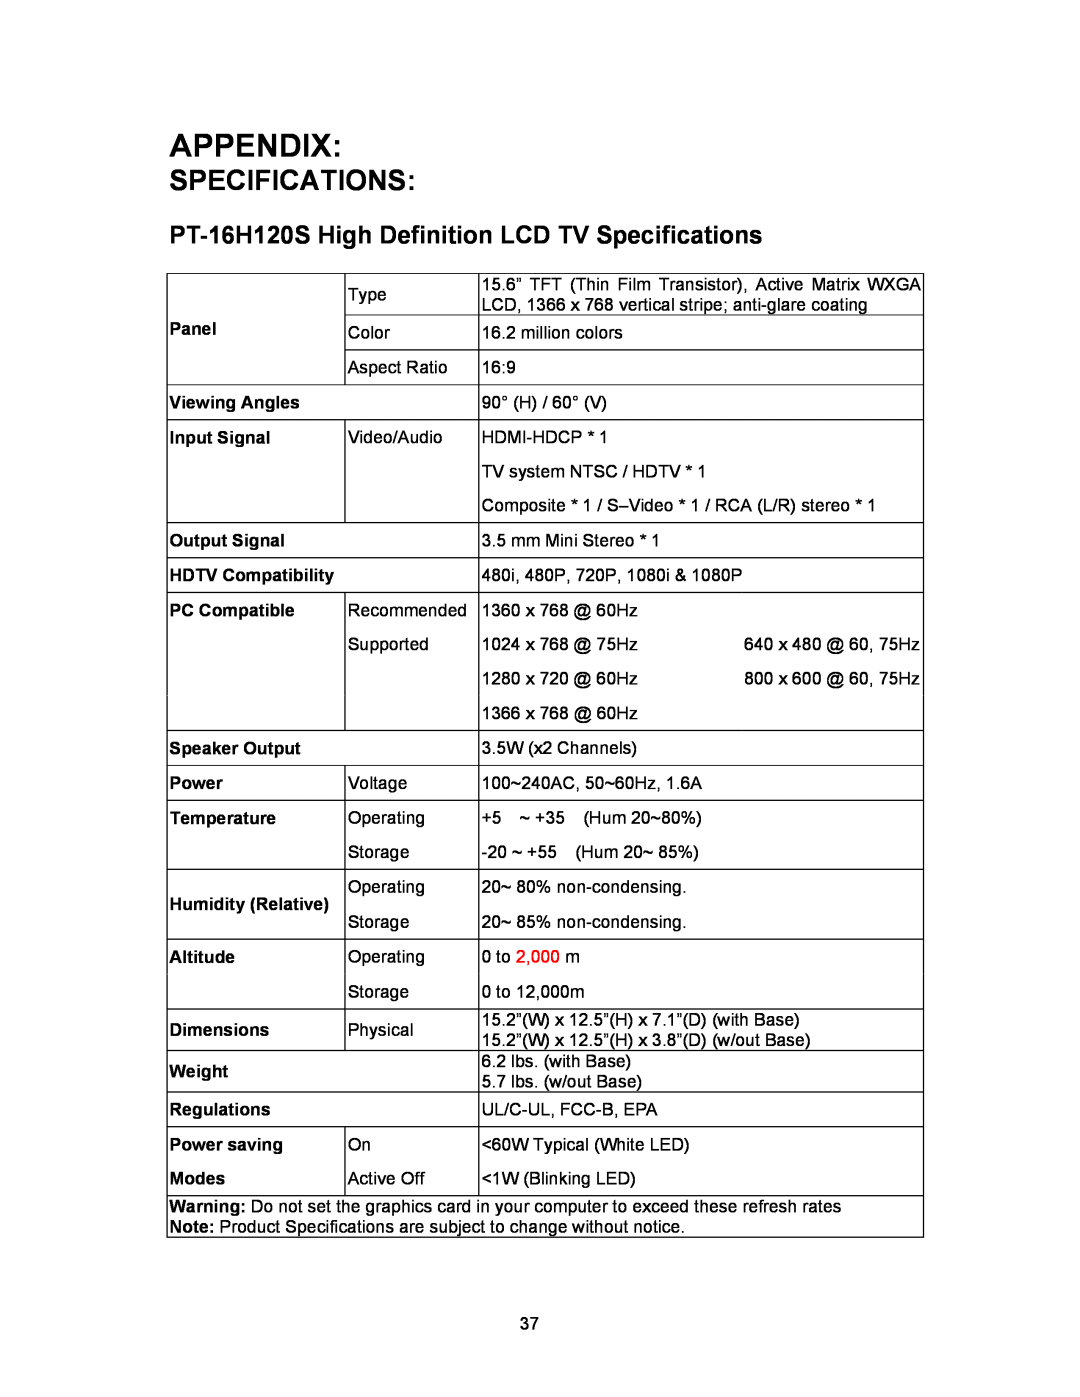 Westinghouse SK-16H120S user manual Appendix, PT-16H120SHigh Definition LCD TV Specifications 